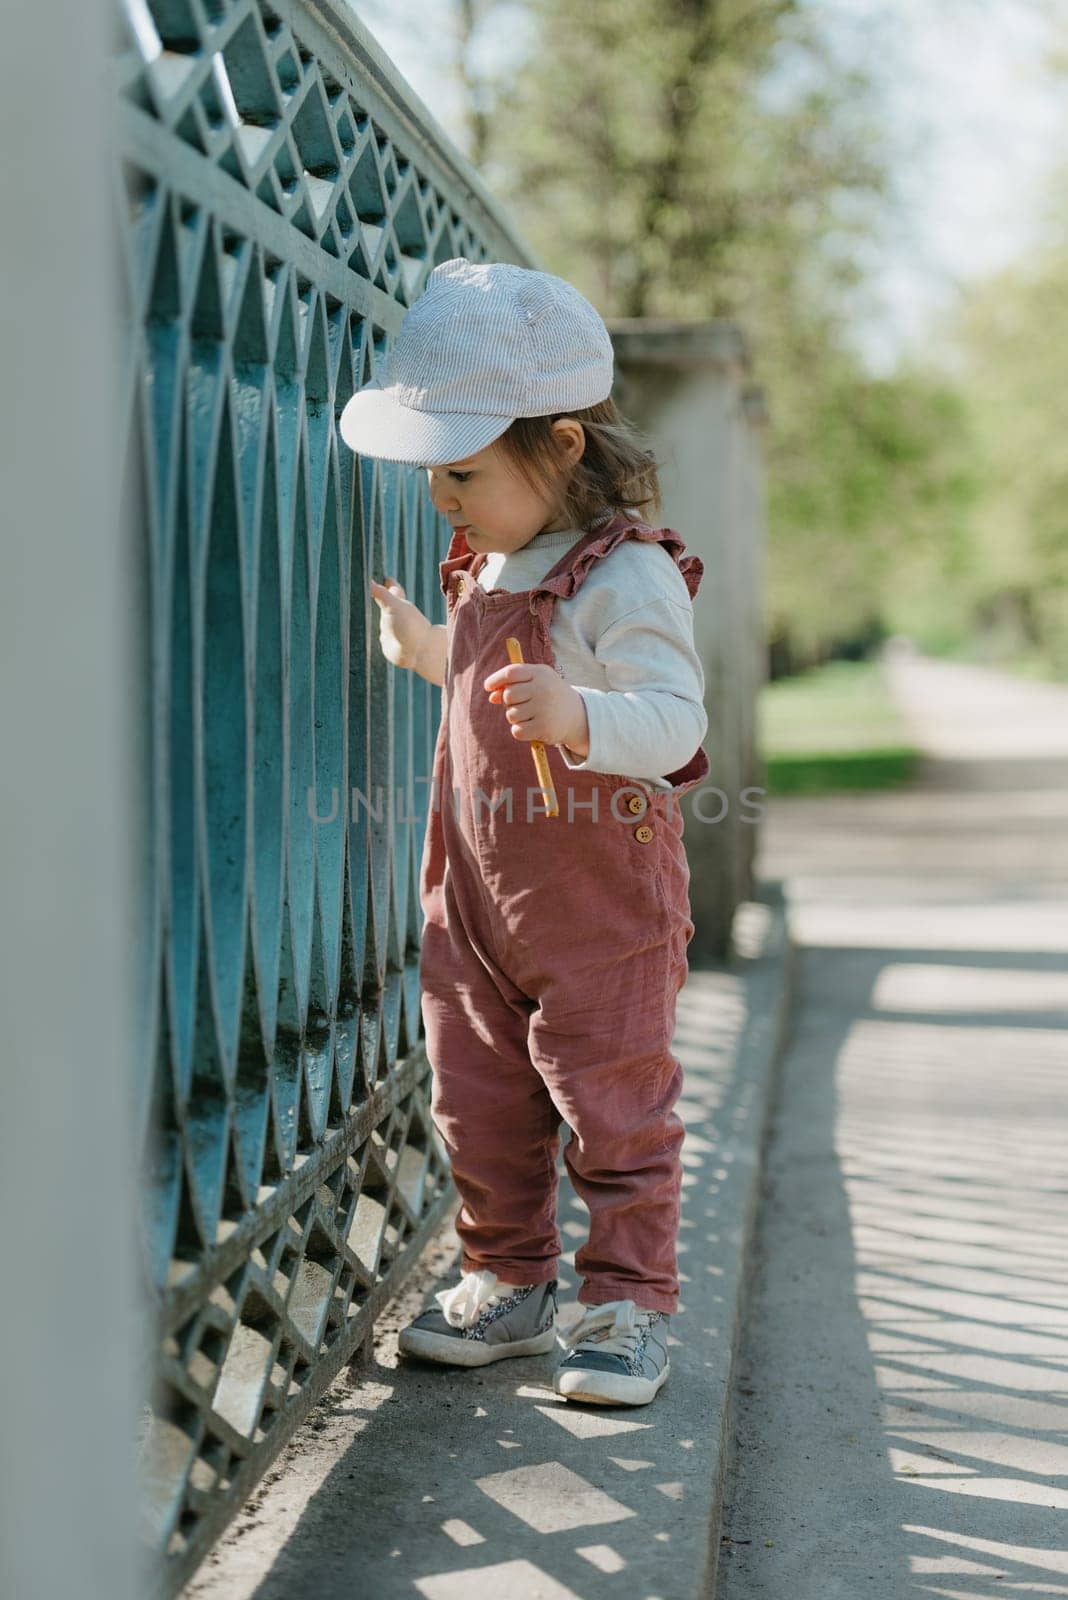 A female toddler eats a sausage close to the garden bridge fence. A baby girl in a cap and velvet overall staring to the side in the park.